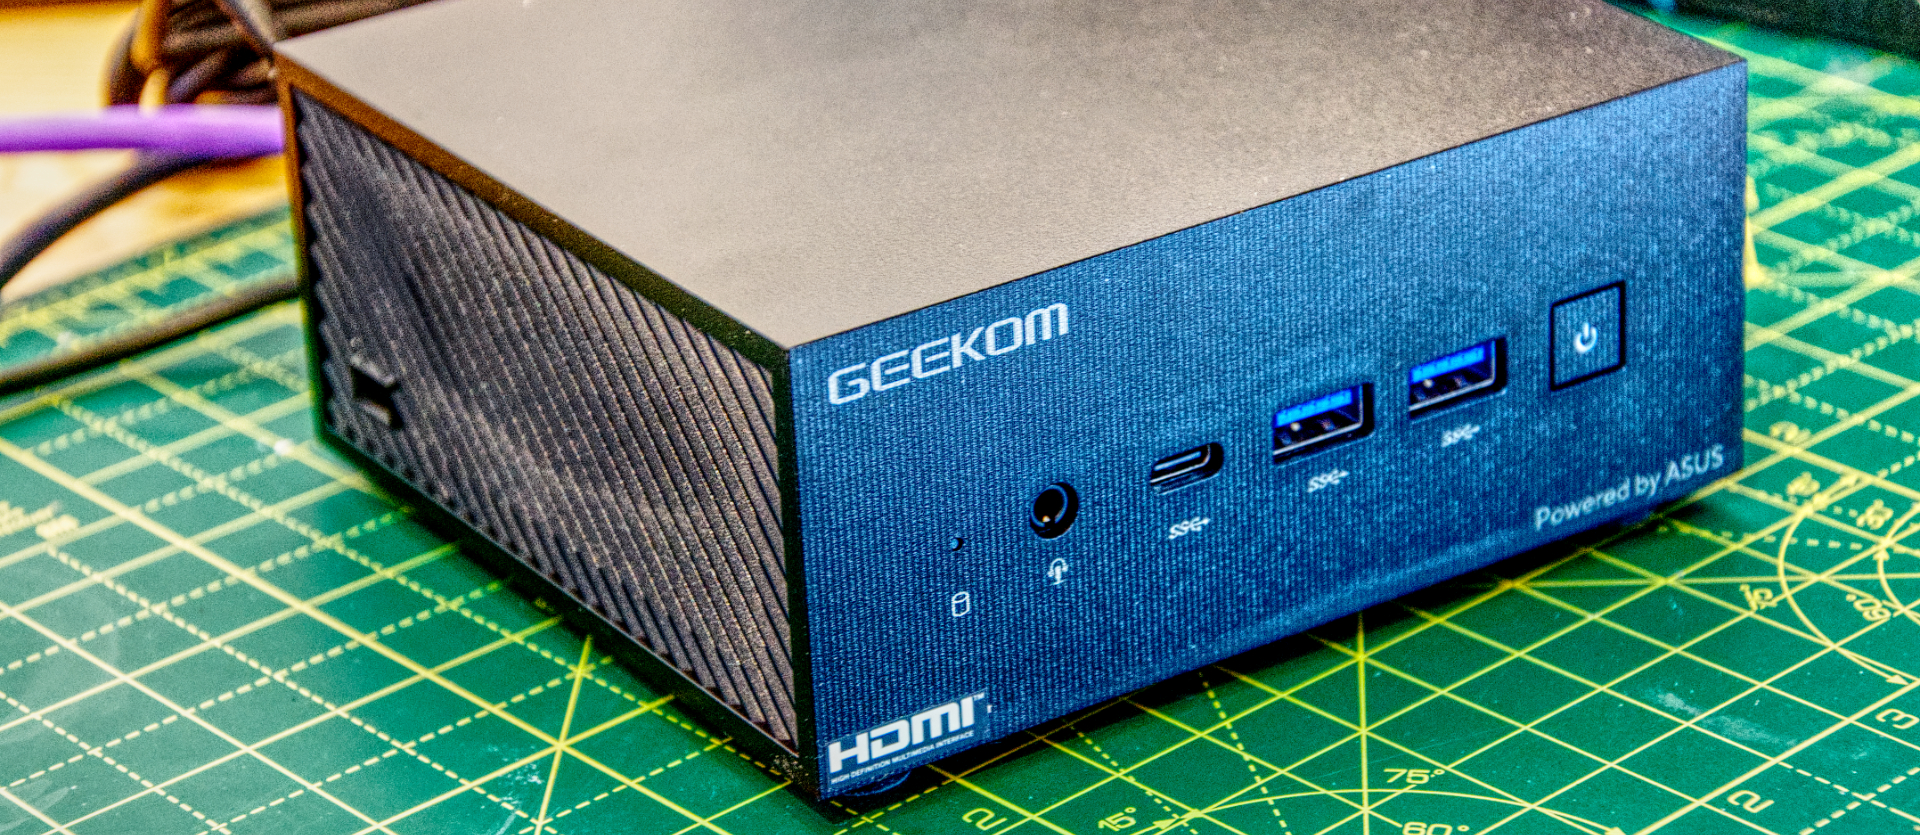 GEEKOM A5, An Affordable Ryzen Powered Mini Computer - PC Perspective